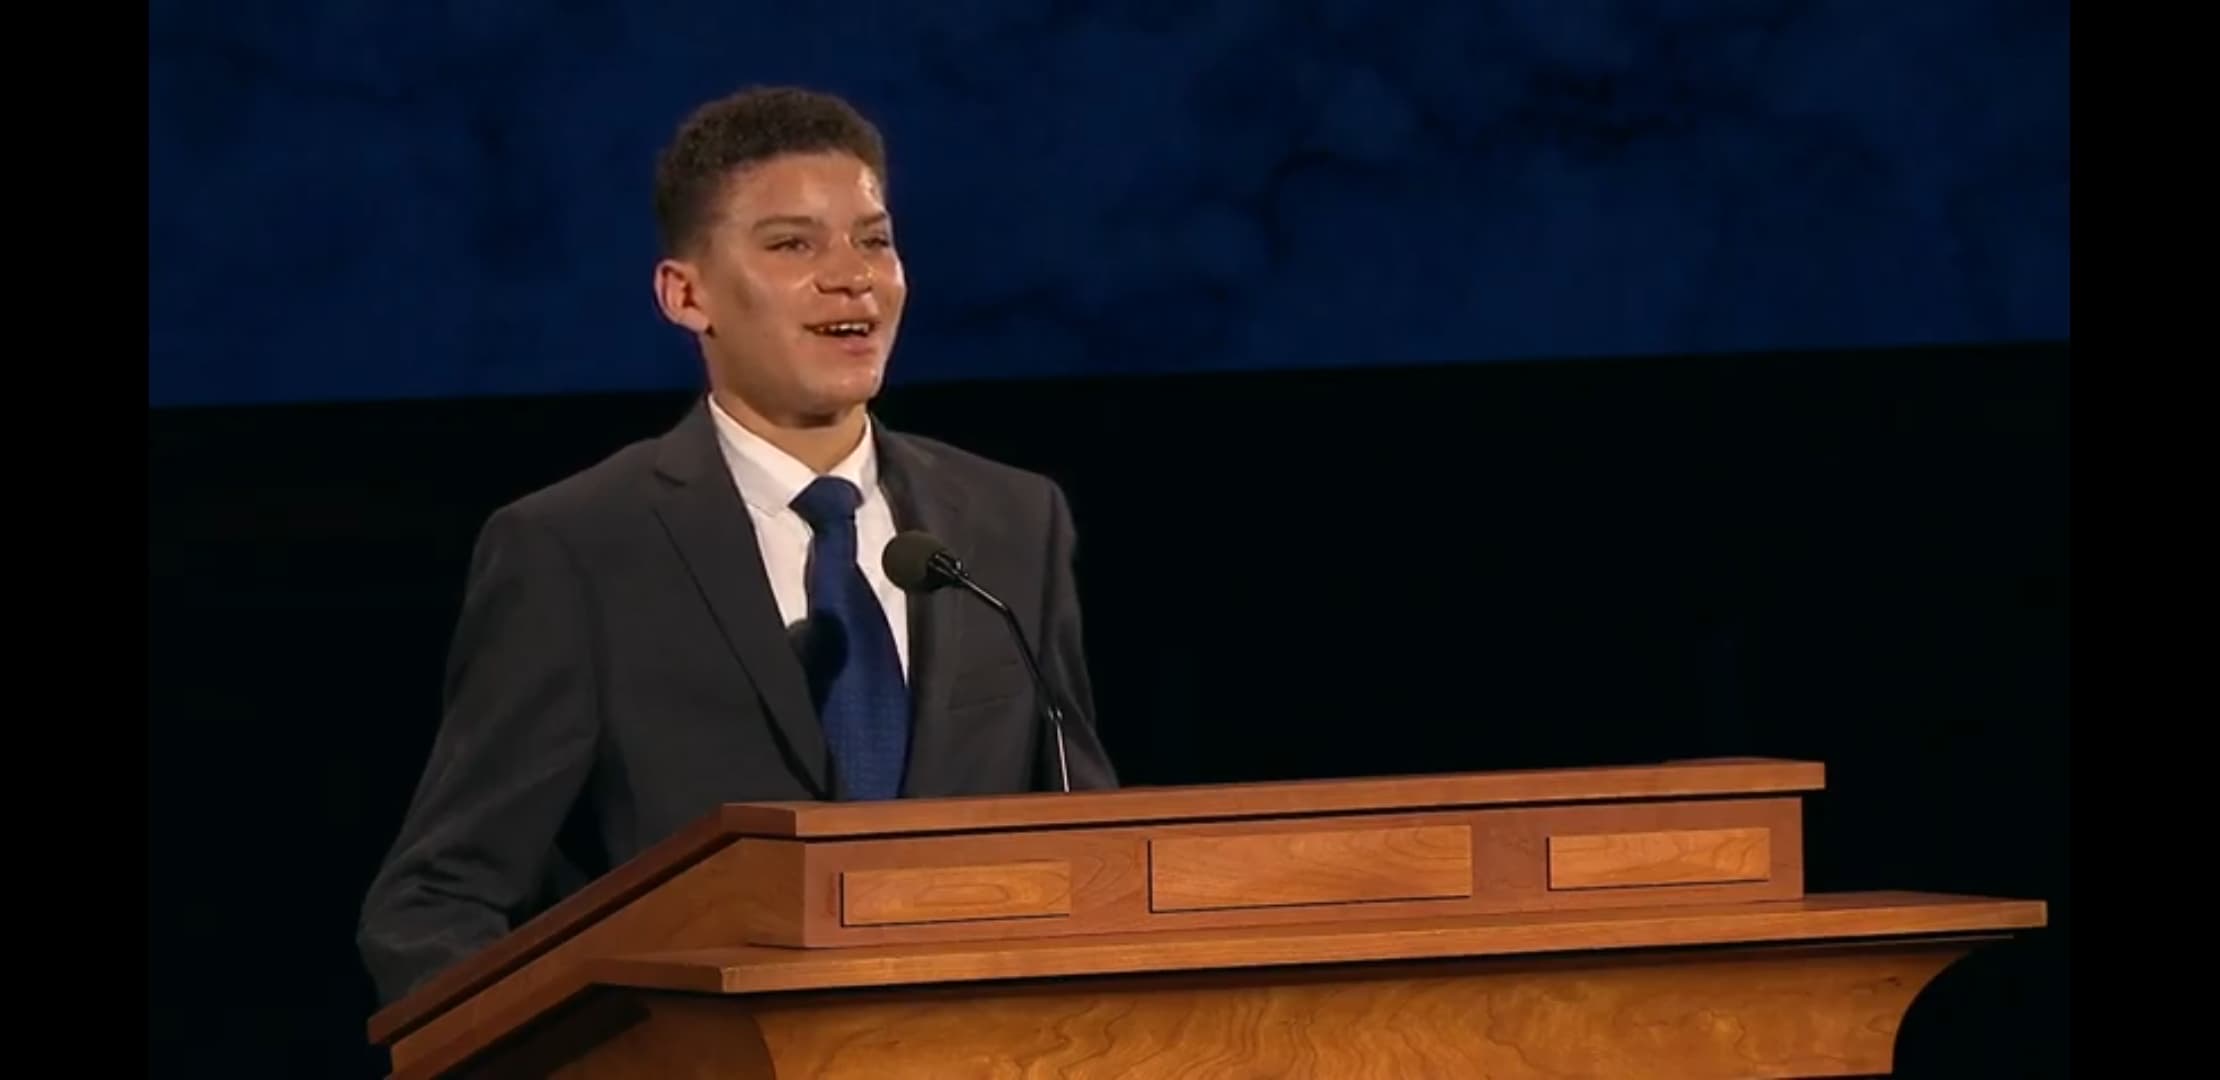 Two youth speak at Saturday evening session of General Conference The